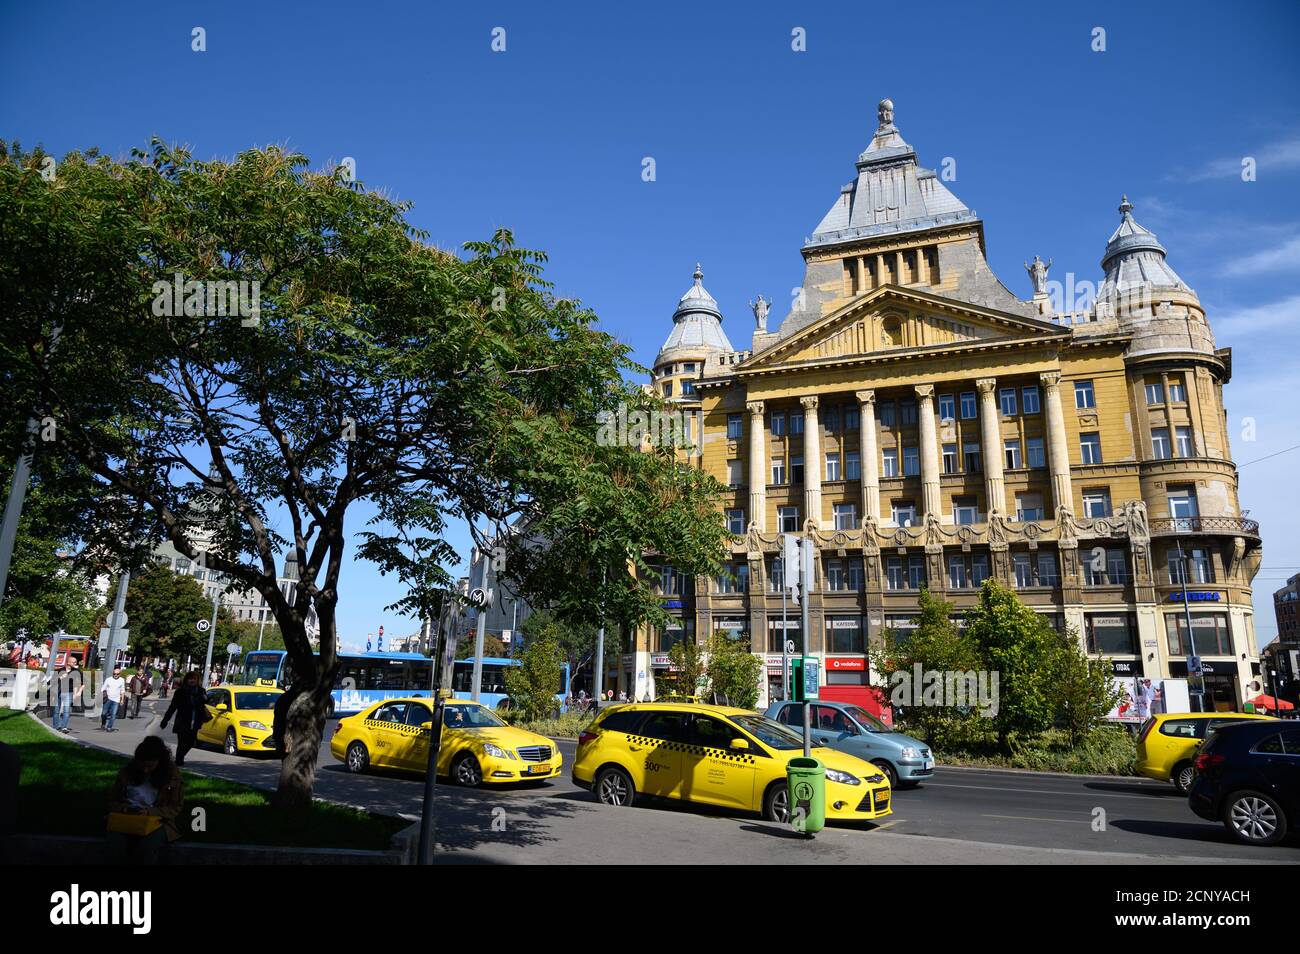 BUDAPEST-HUNGARY- SEPTEMBER 26, 2019: Yellow taxis passing in front of the old building of Katedra nyelviskola in Budapest the capital city of Hungary Stock Photo